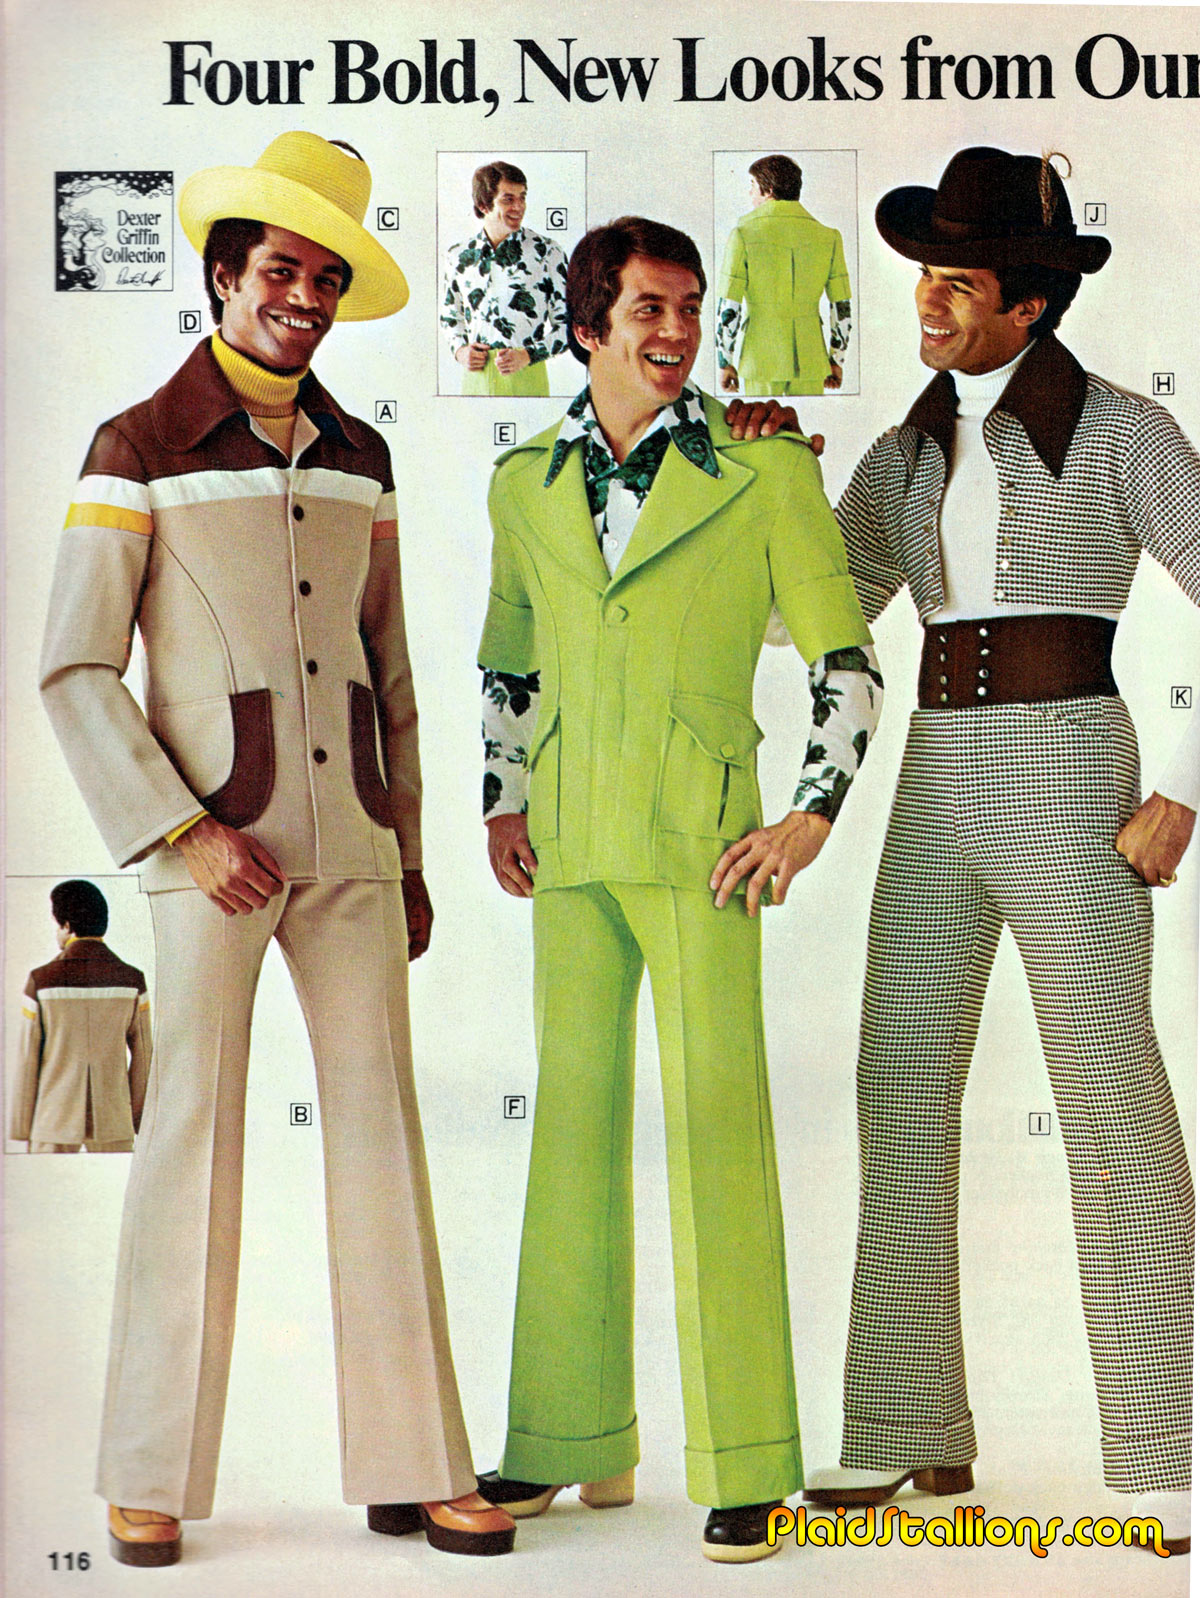 Plaid Stallions : Rambling and Reflections on '70s pop culture: Welcome ...